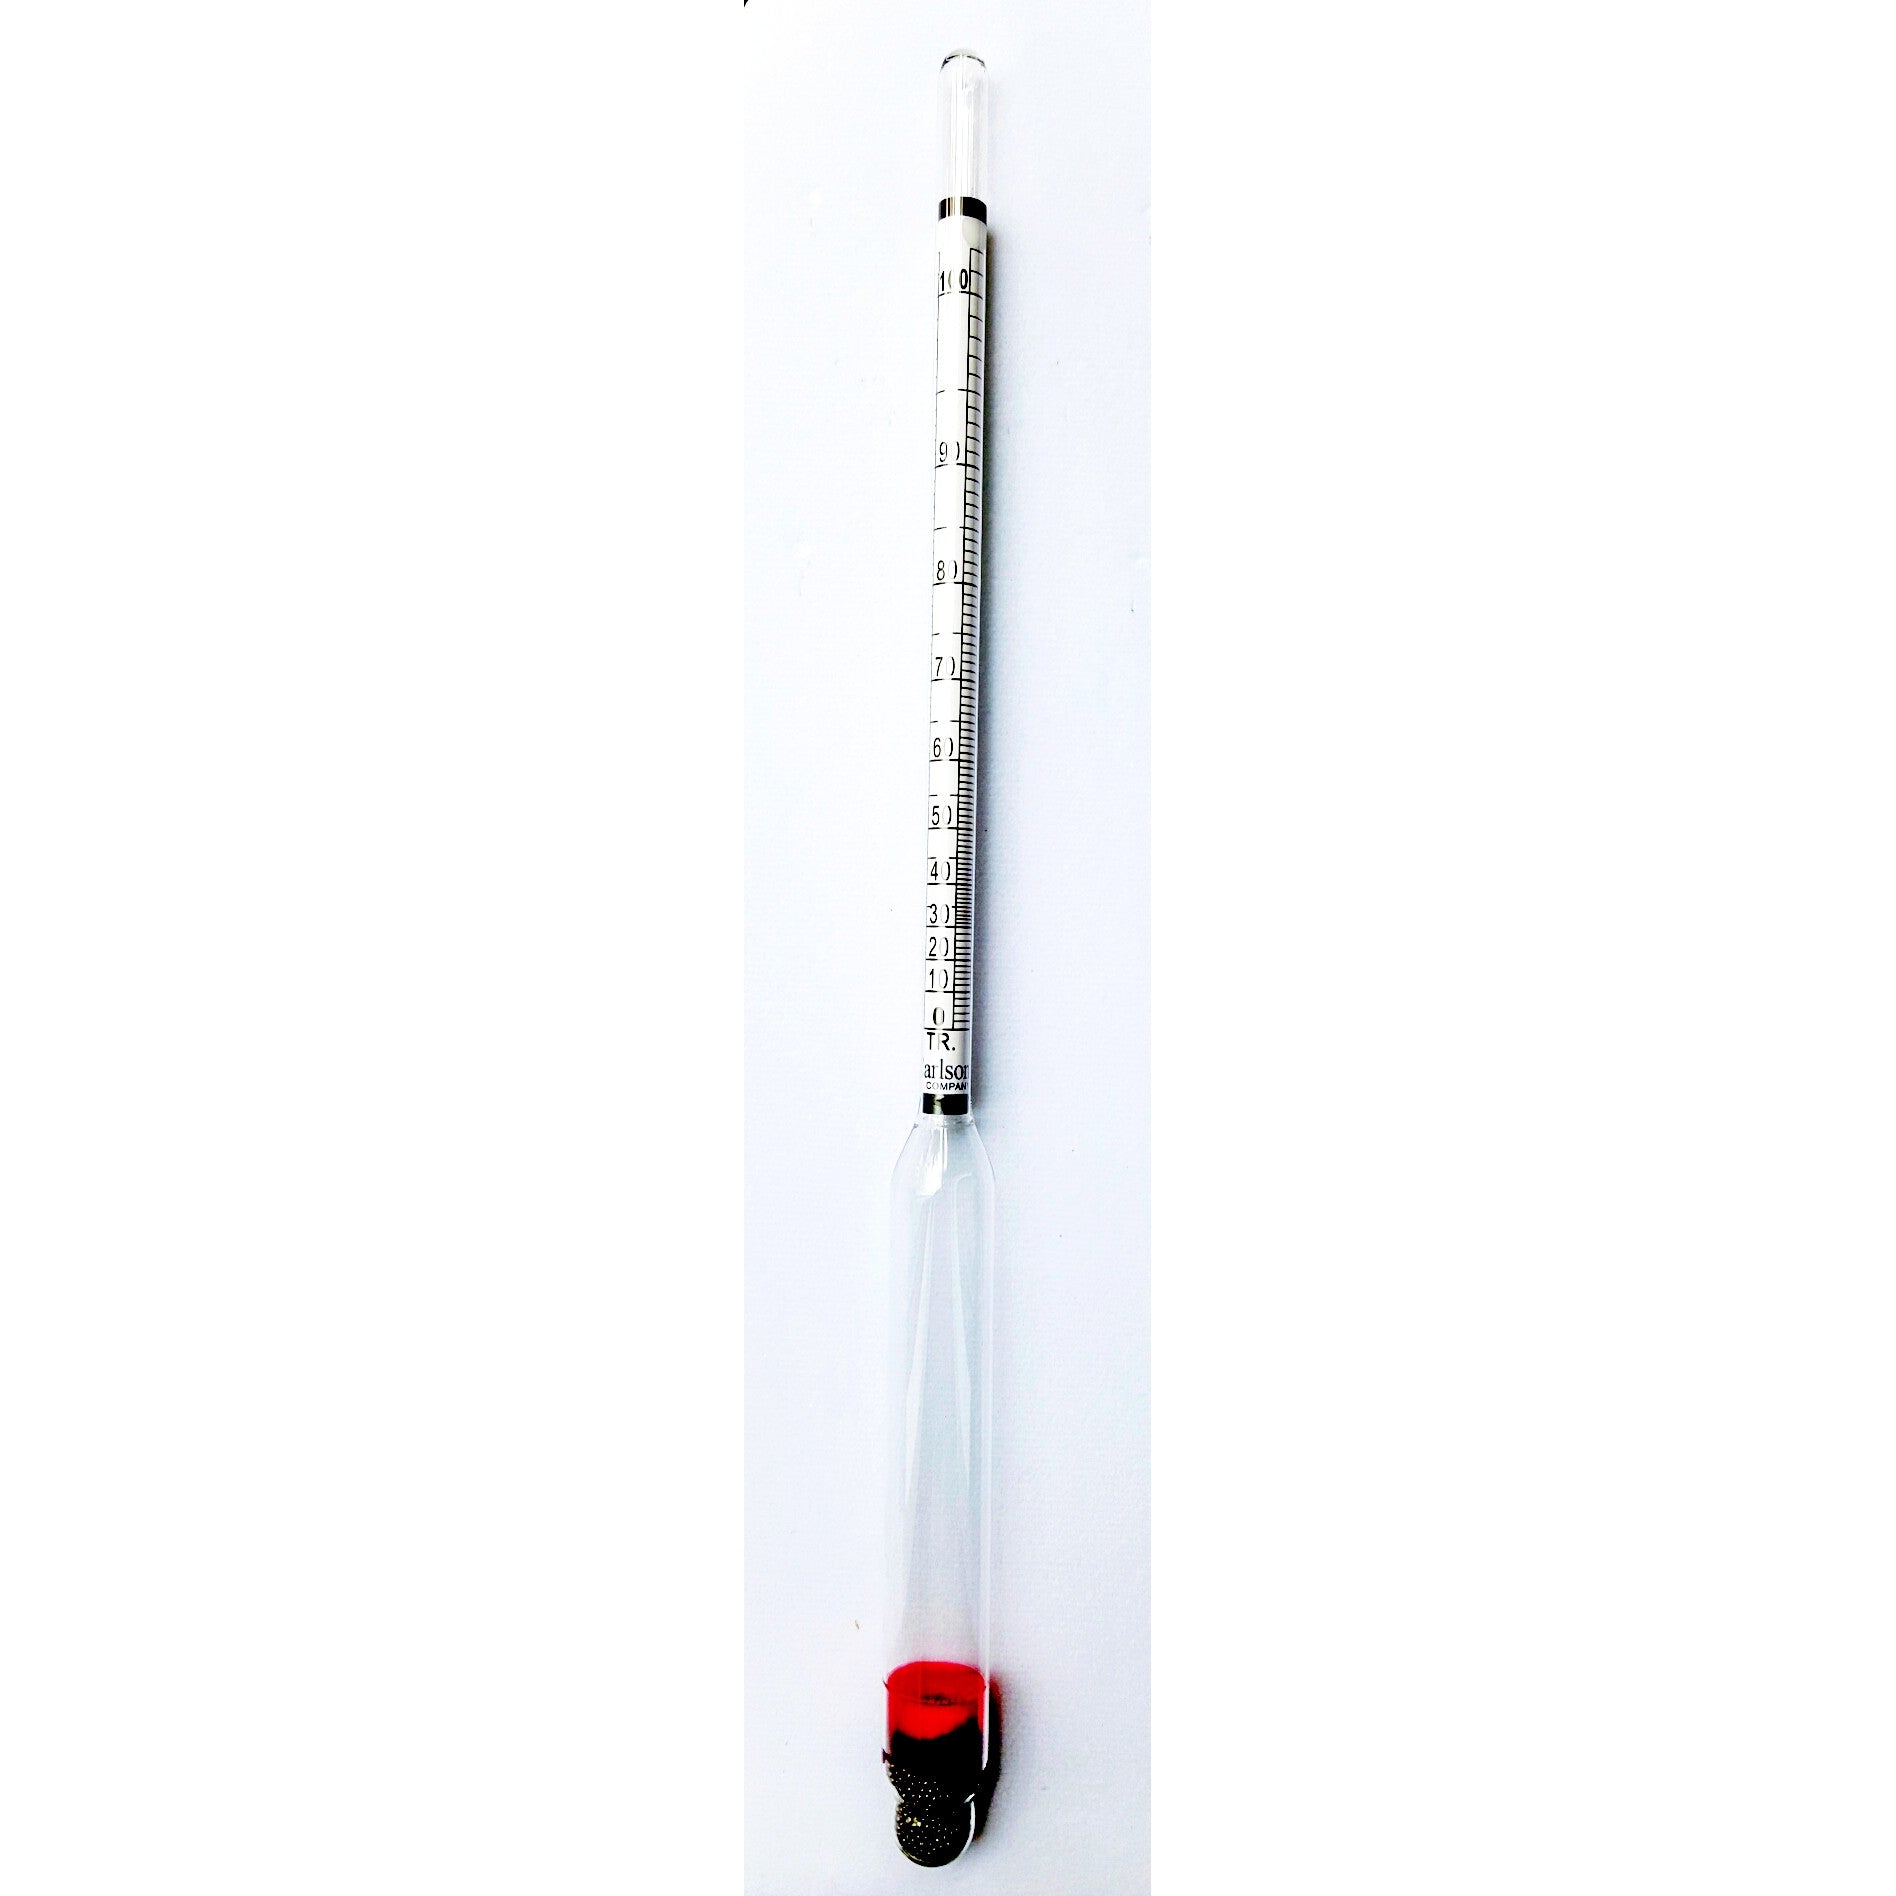 2 Proof & Tralle Hydrometer Alcohol Meter Distilling Testing Spirit Scale 0-200% - UproMax